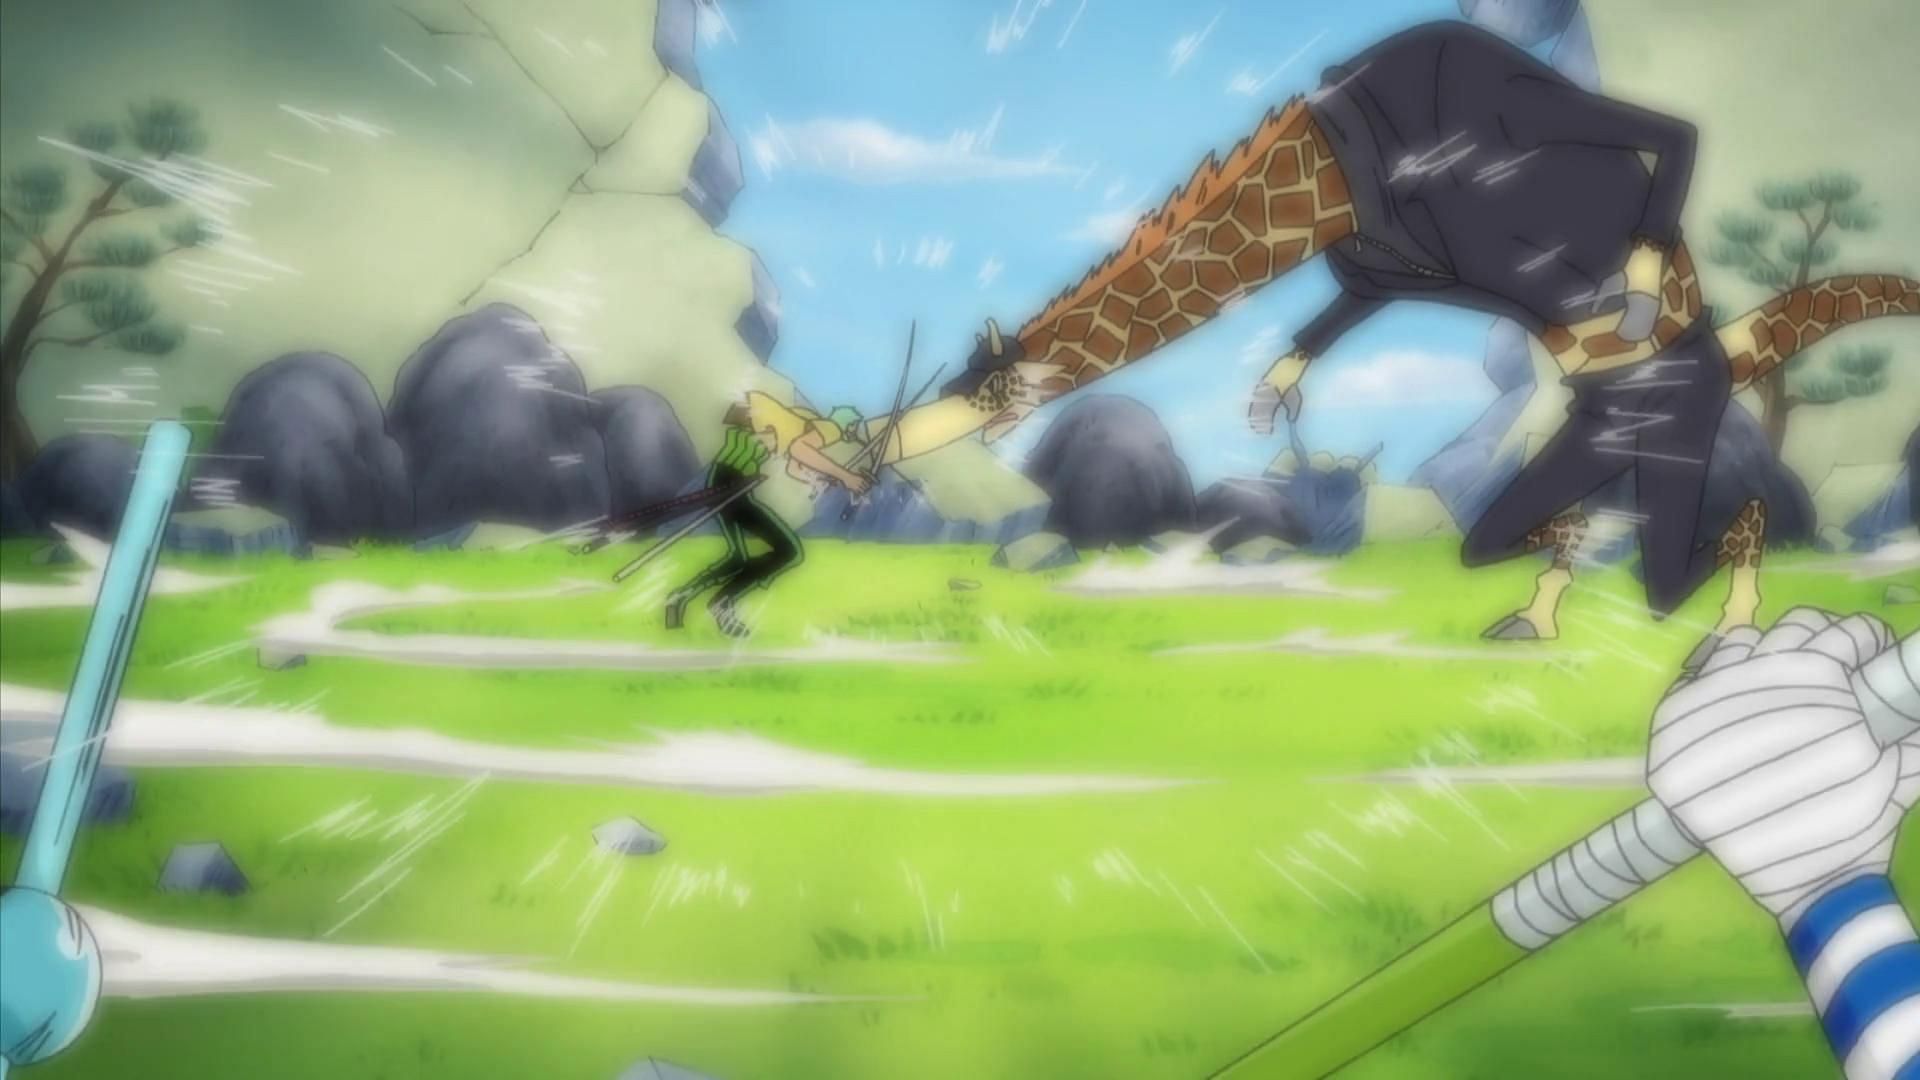 The scale of the fight between Kaku and Zoro was completely different than the one of the fight between Jabra and Sanji (Image via Toei Animation, One Piece)